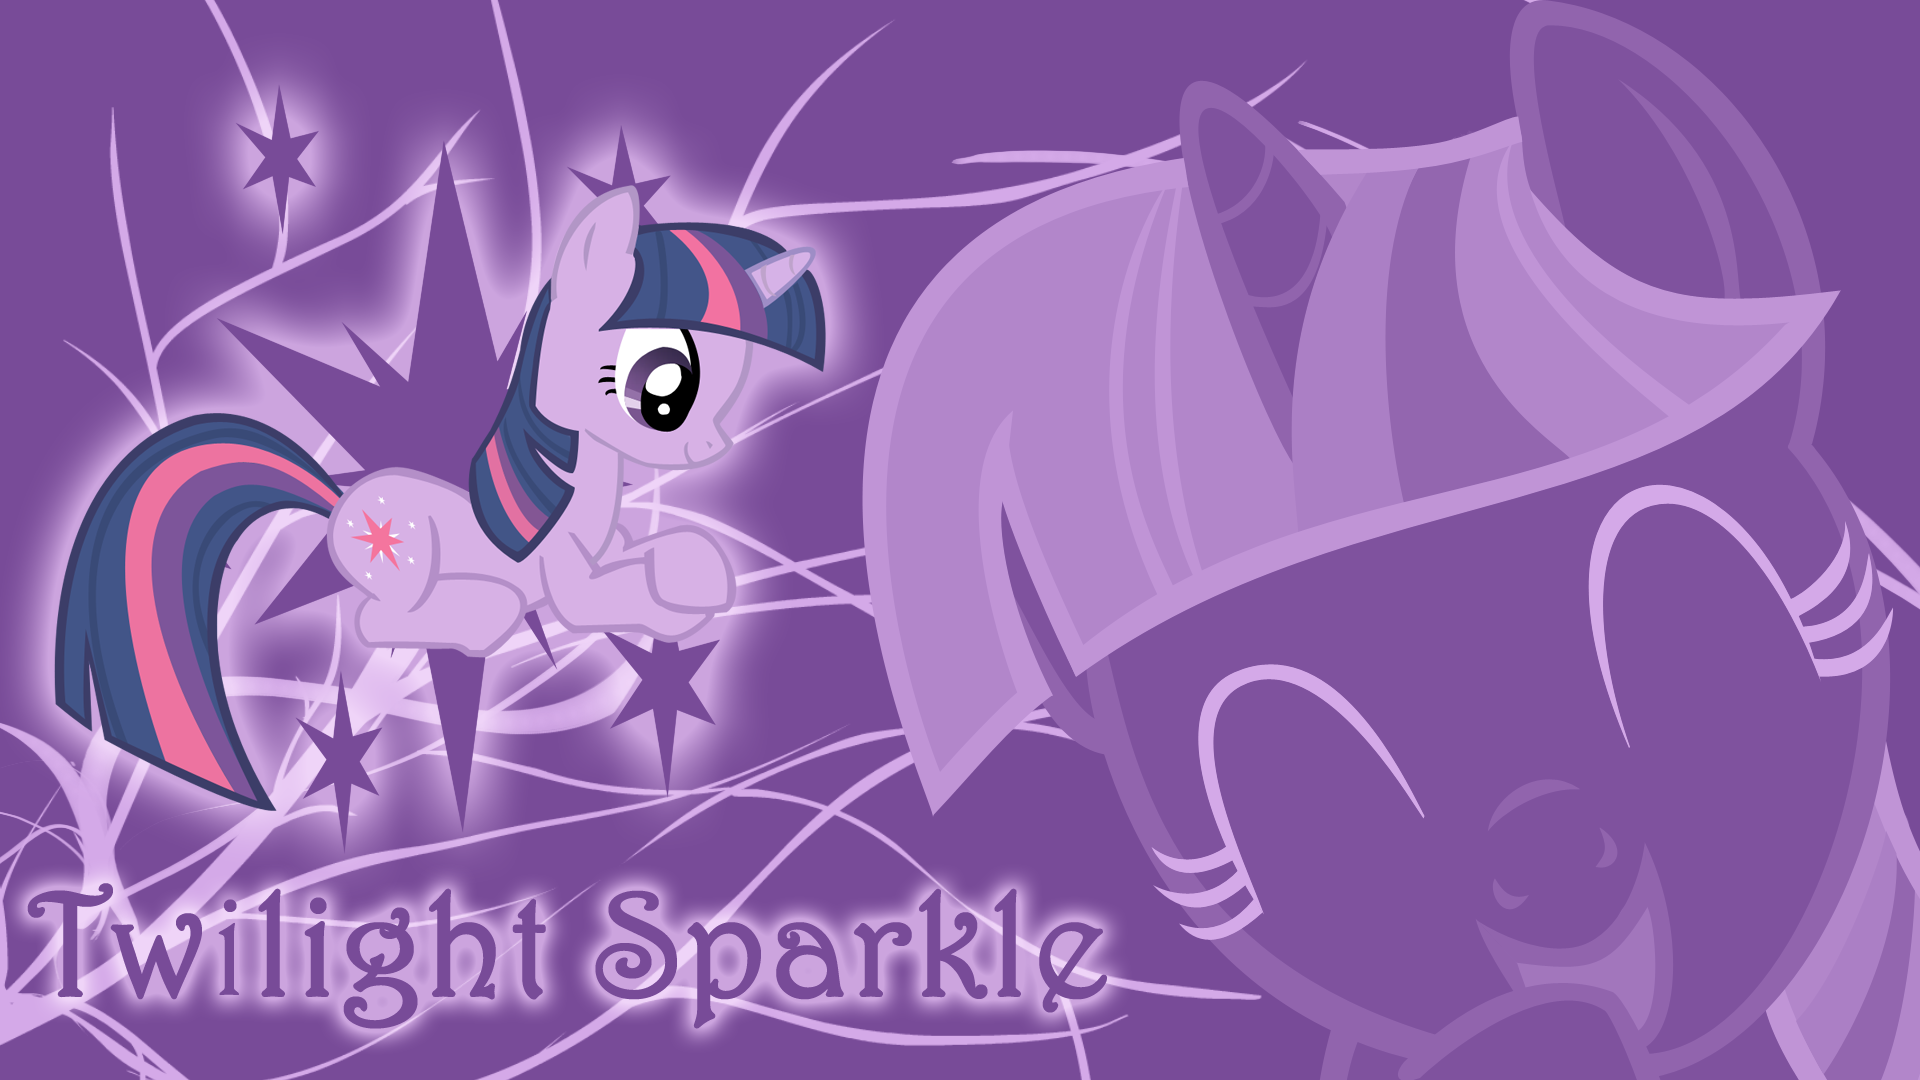 Study is Important - Twilight Sparkle Wallpaper by cradet